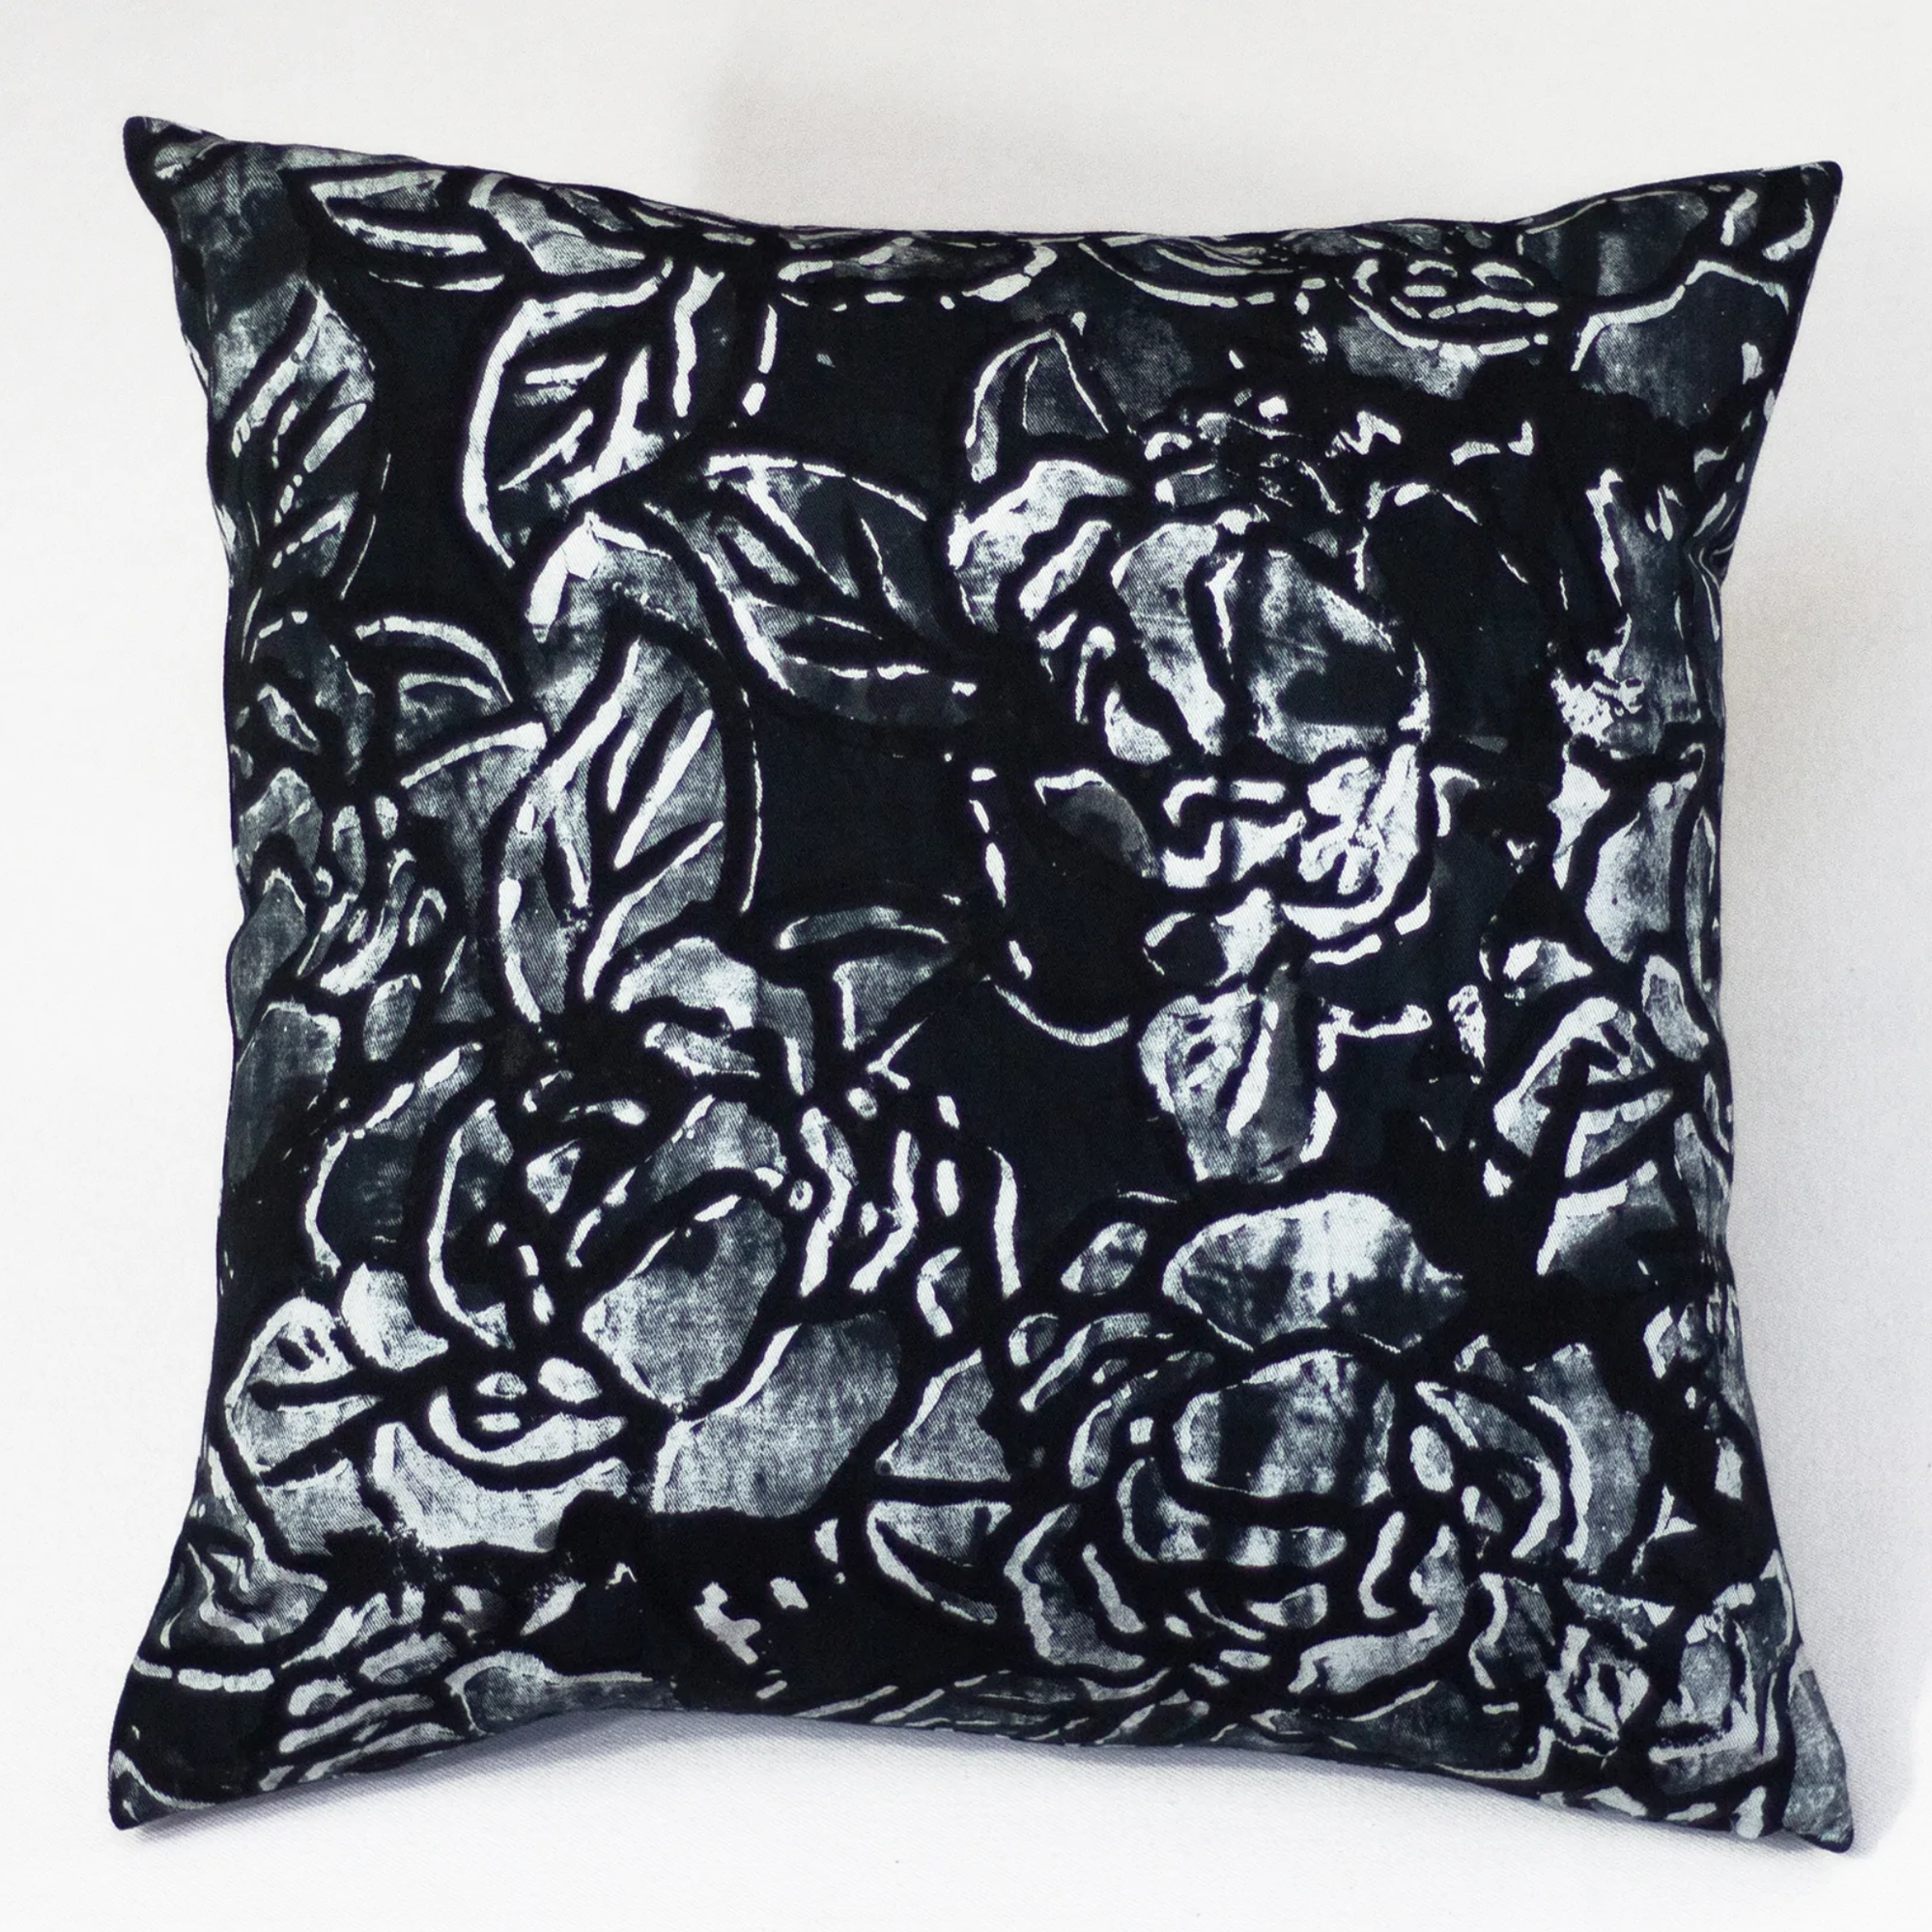 Hand Painted Accent Pillow Cover - Black Rose